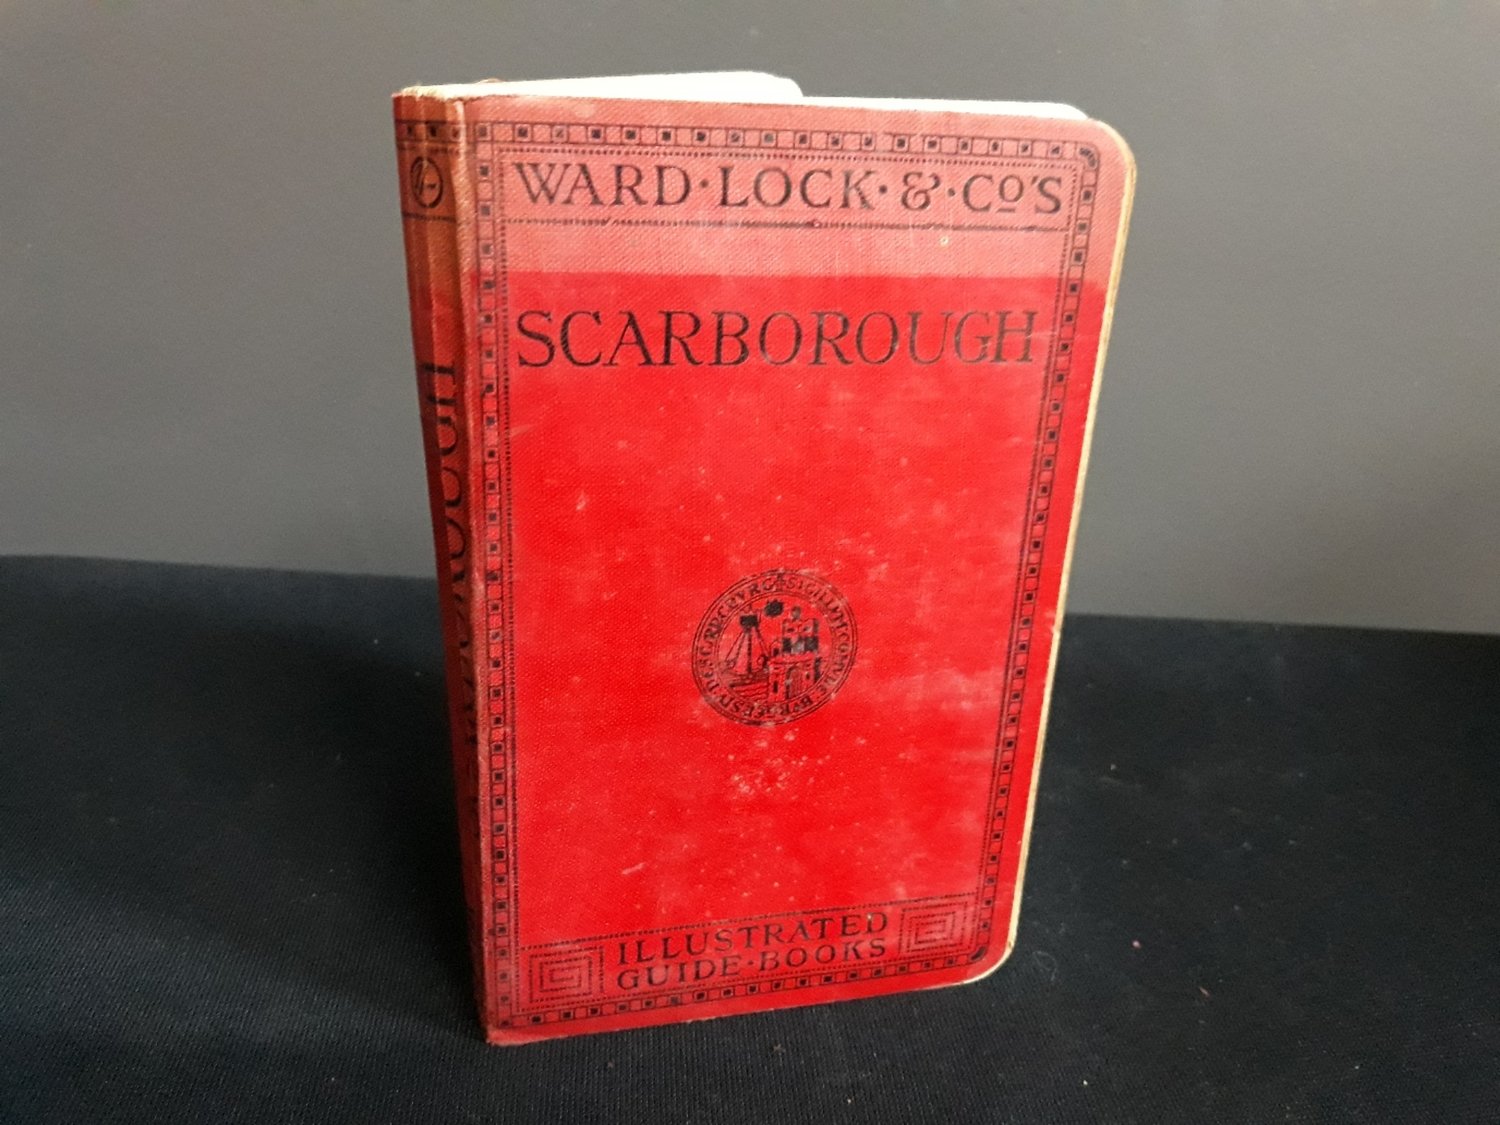 Ward, Lock & Co's Illustrated Guide Book- Scarborough.